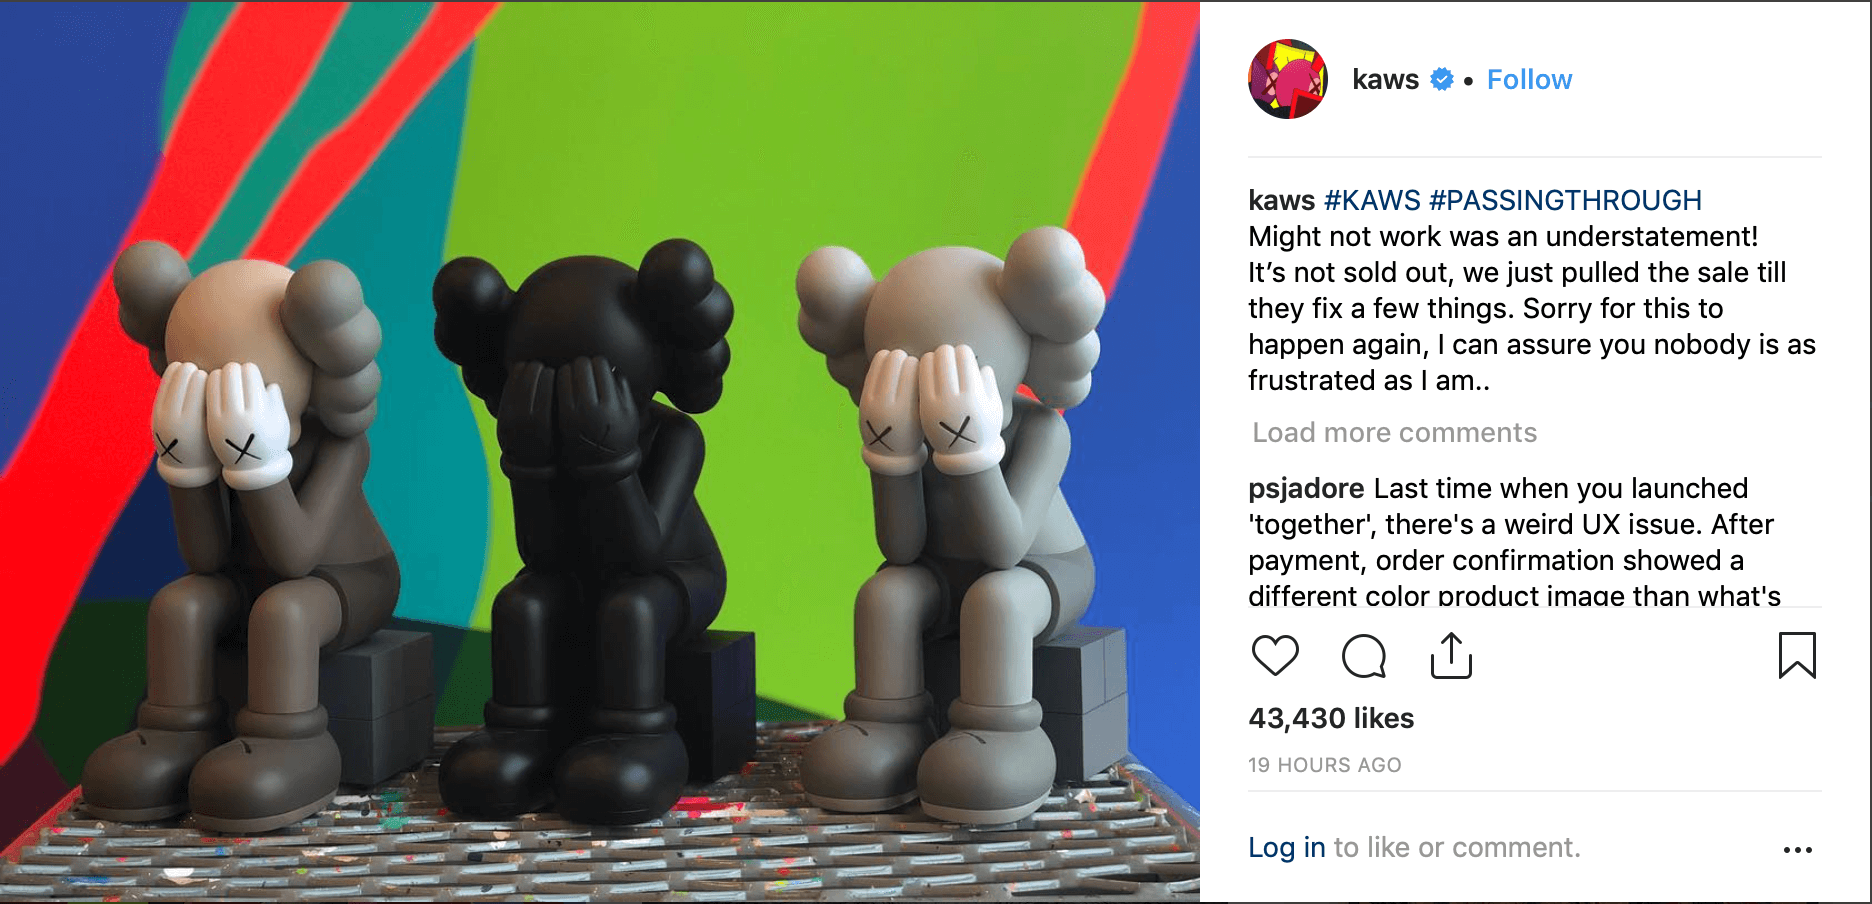 kaws-passing-through-comment